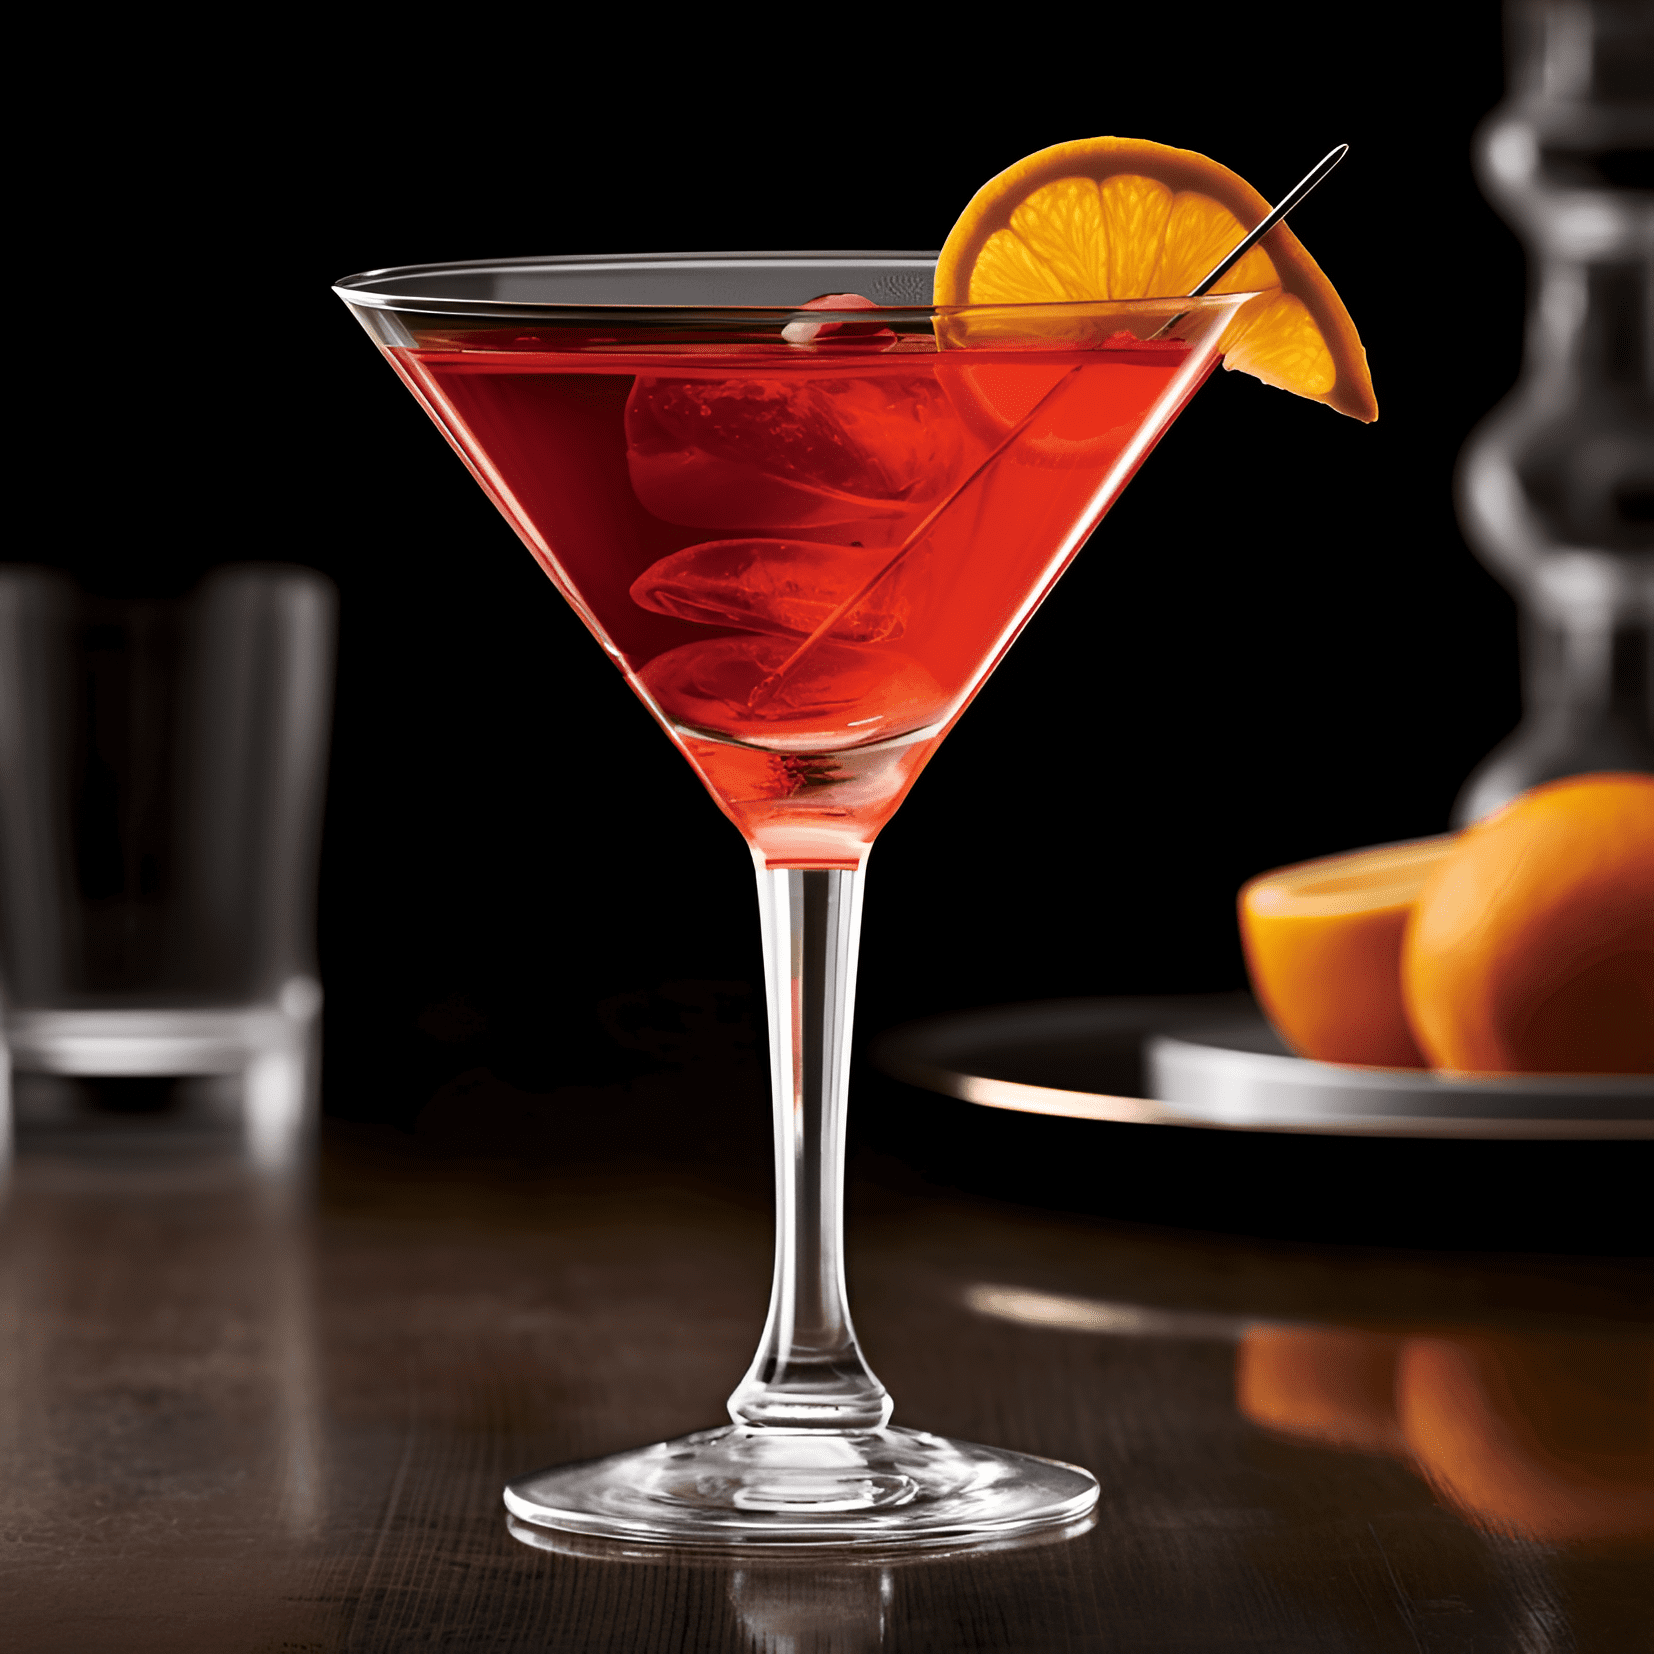 Palermo Cocktail Recipe - The Palermo cocktail is a delightful balance of sweet, sour, and bitter flavors, with a smooth, velvety texture. The combination of orange liqueur, vermouth, and bitters creates a complex, layered taste that is both refreshing and satisfying.